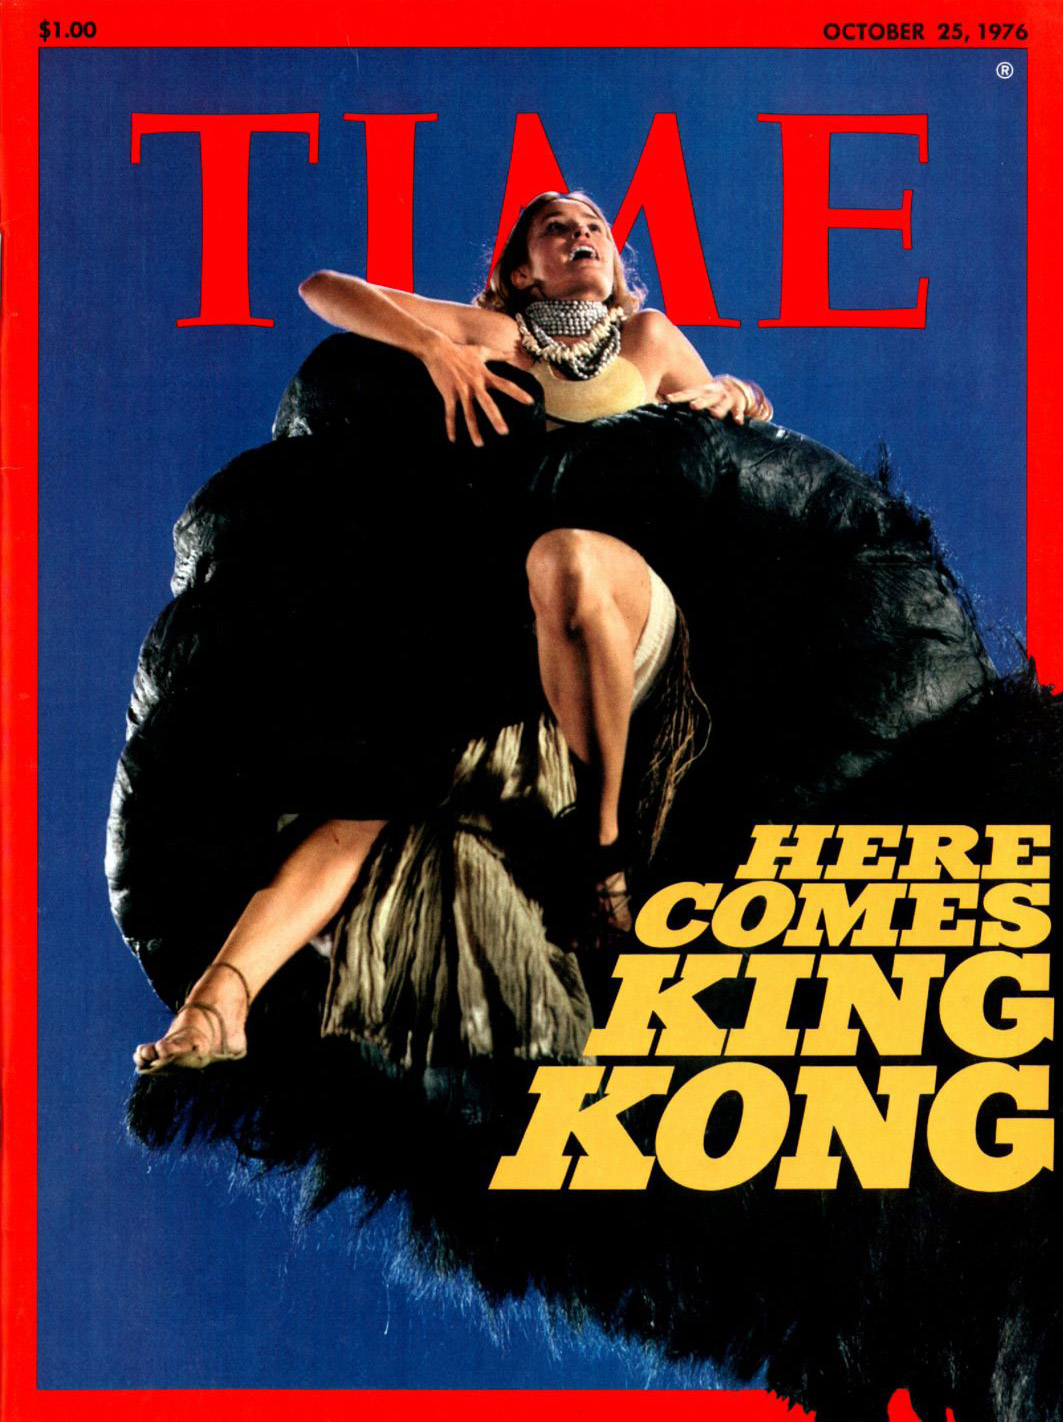 Oct. 25, 1976 cover of TIME magazine.